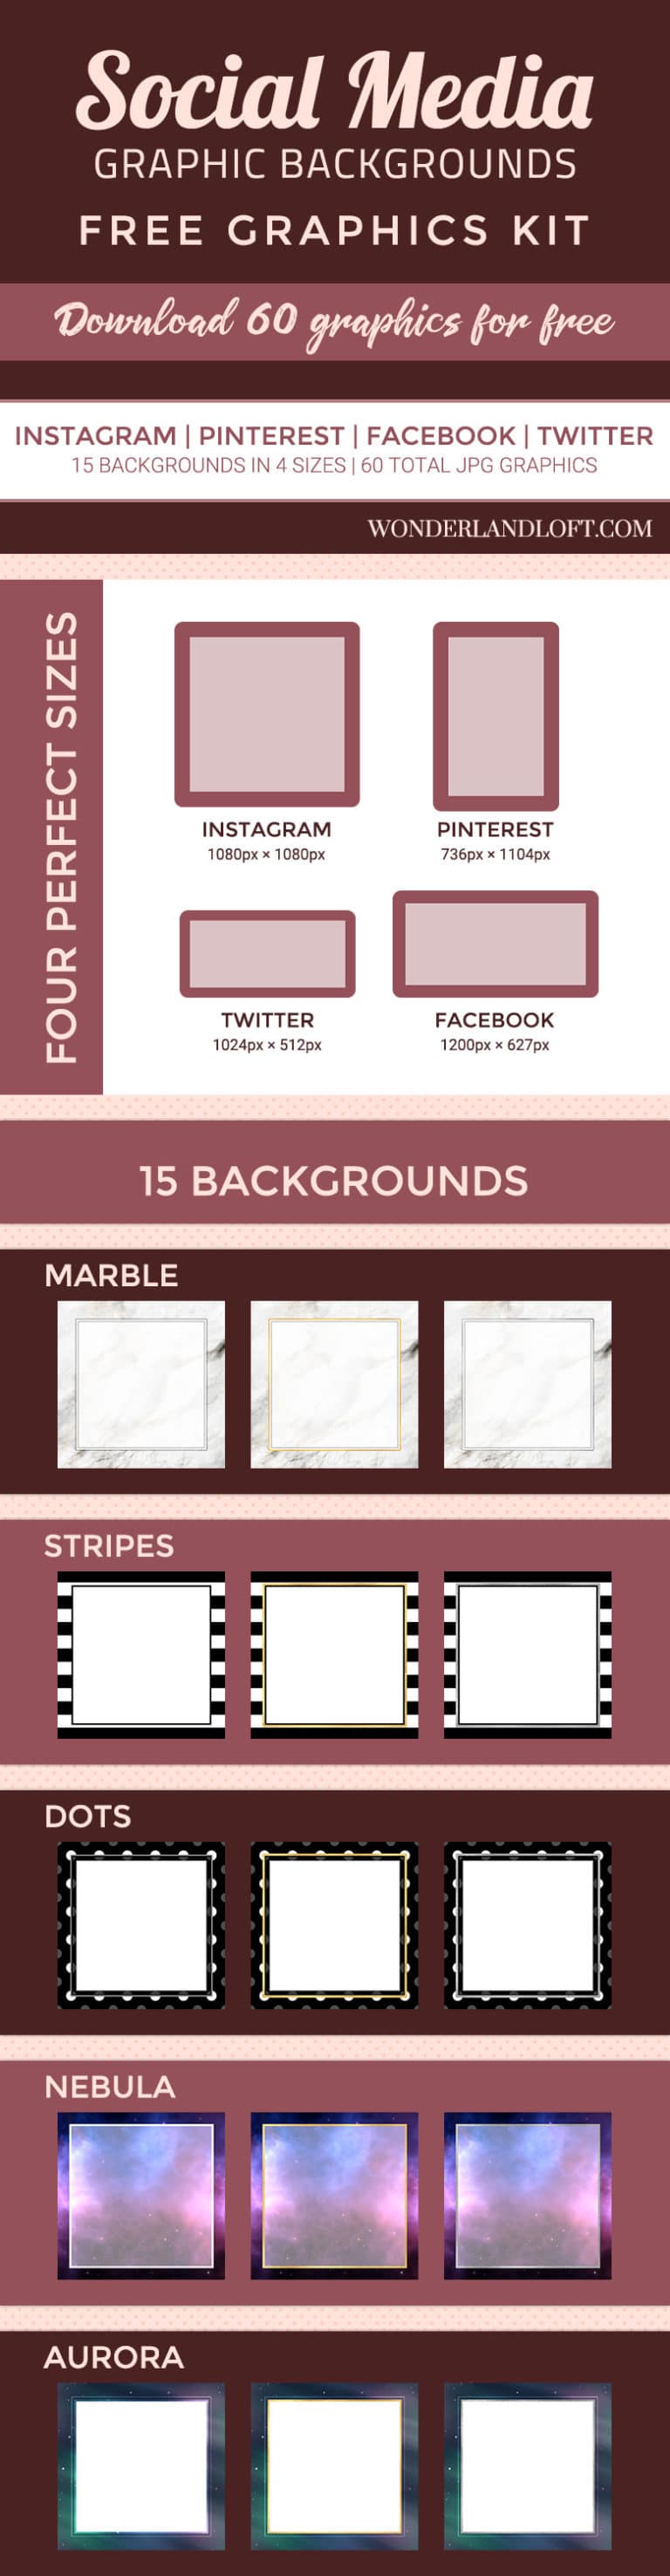 60 free social media background graphics